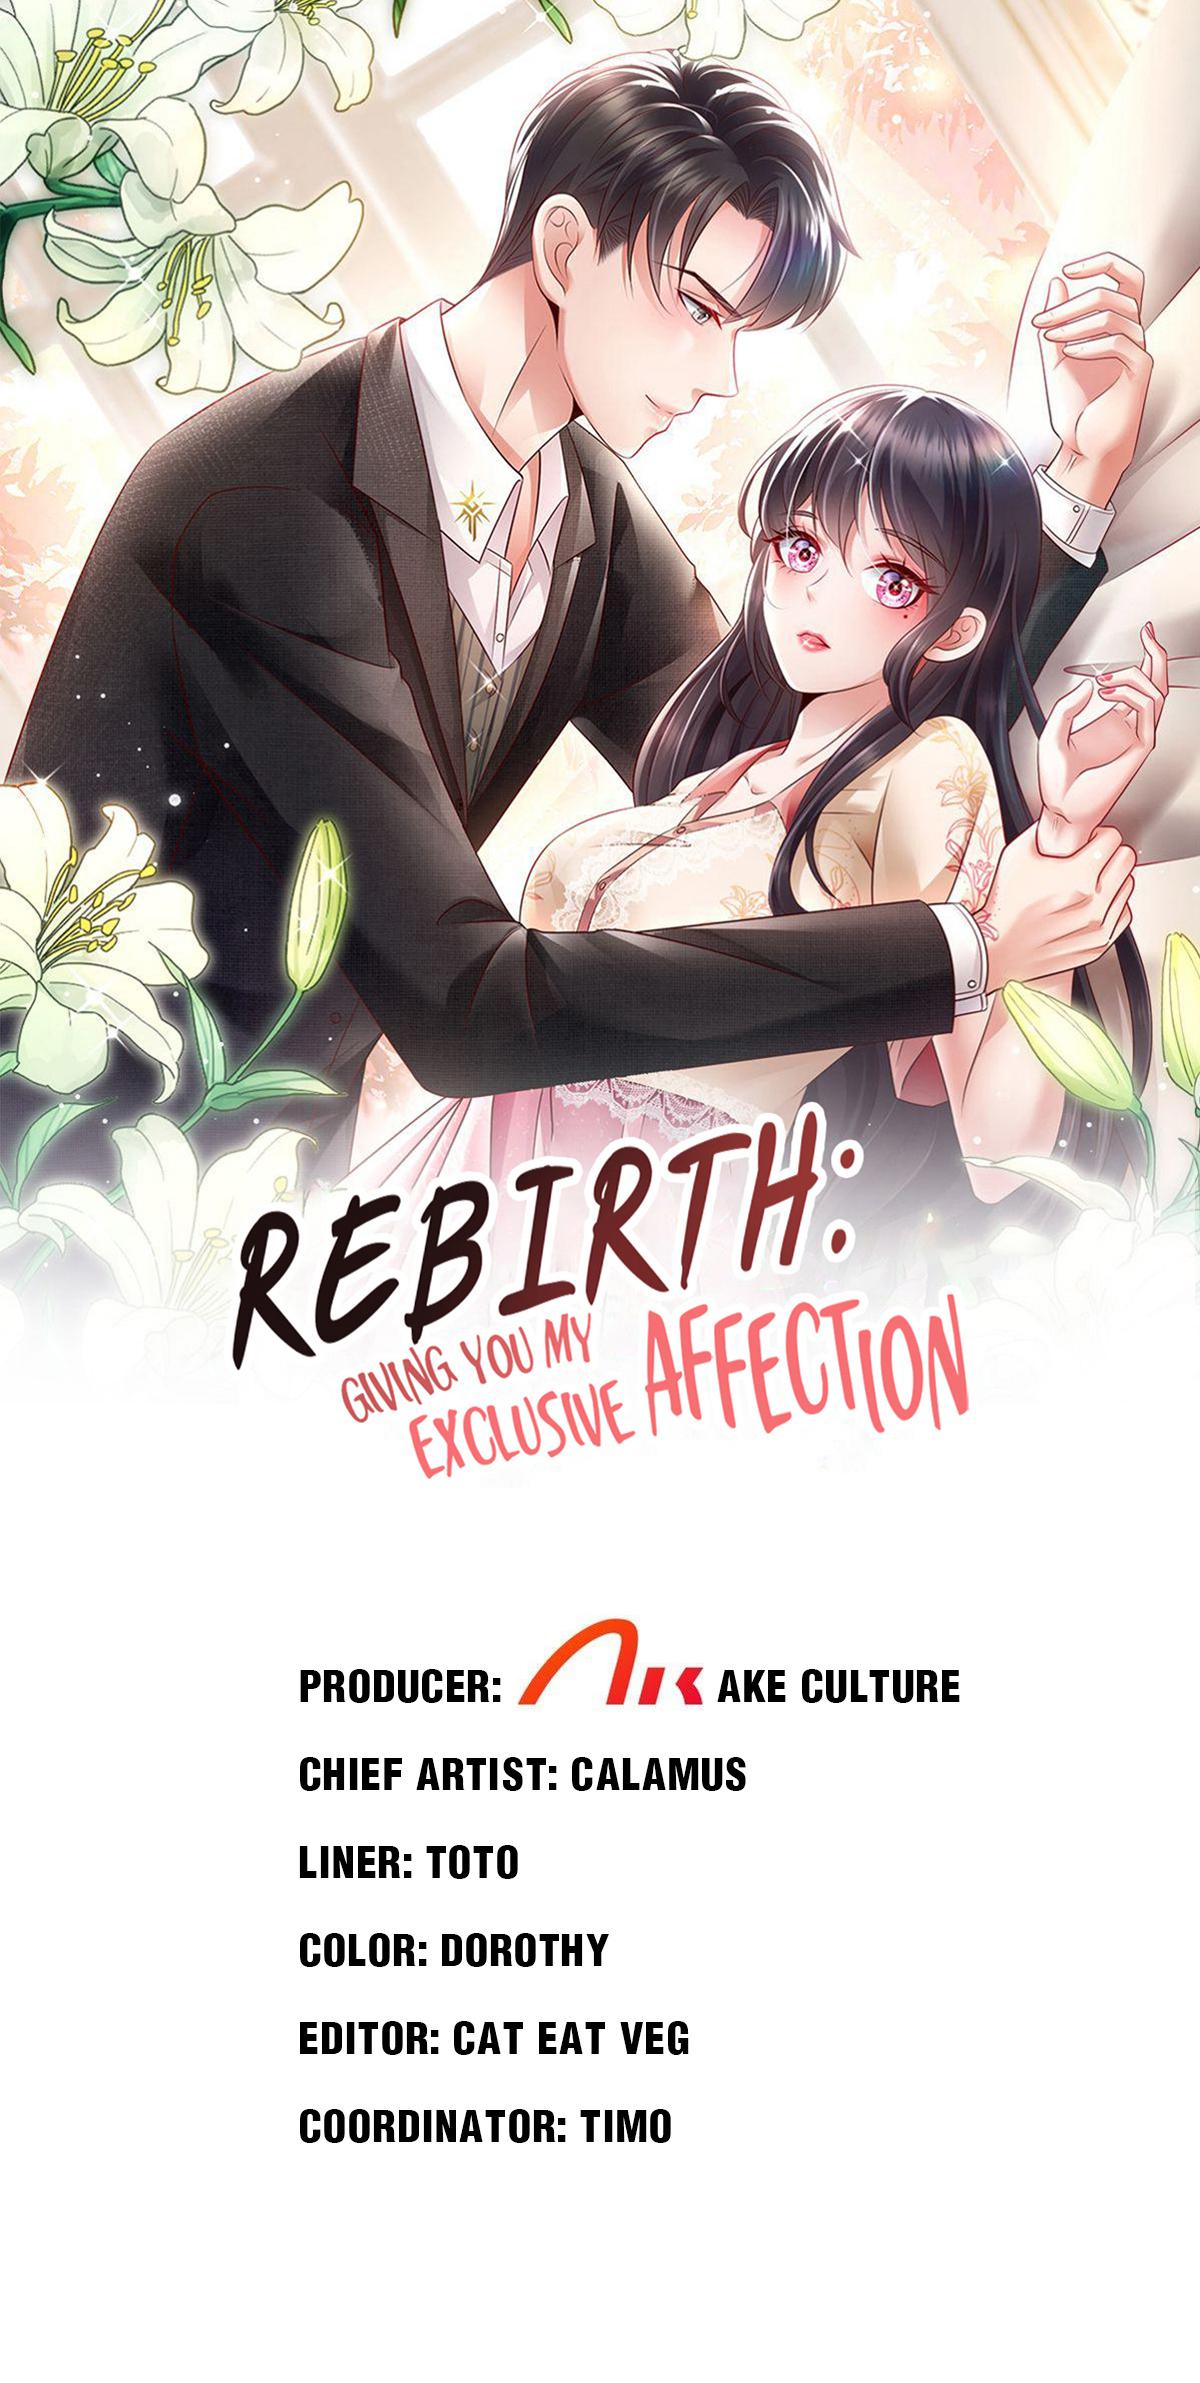 Rebirth: Giving You My Exclusive Affection 181